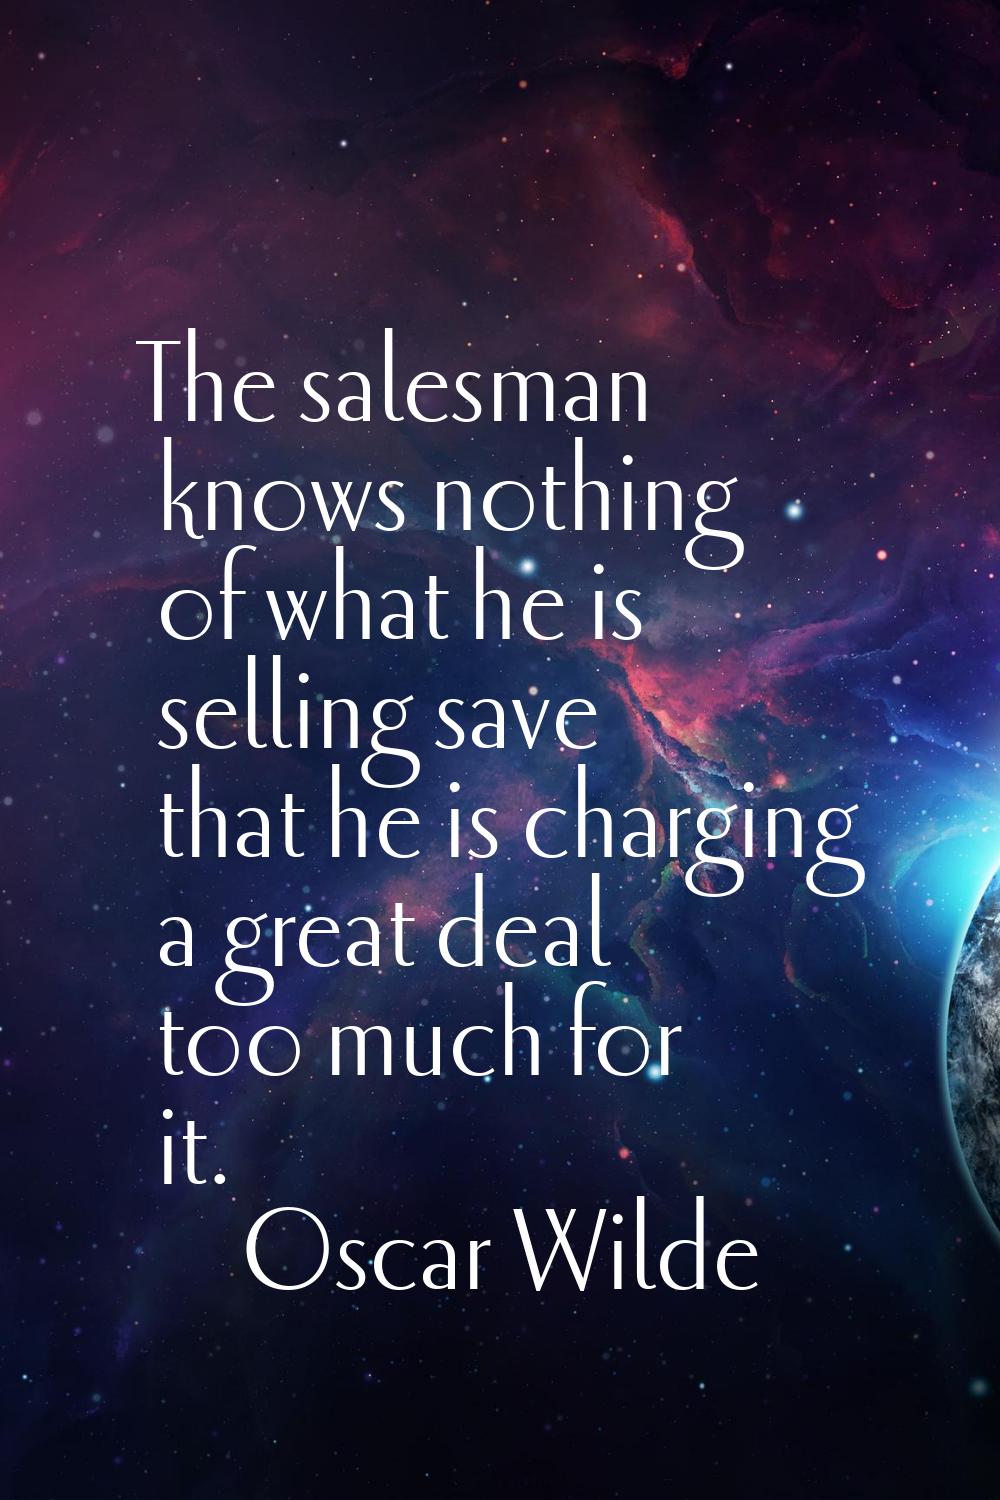 The salesman knows nothing of what he is selling save that he is charging a great deal too much for